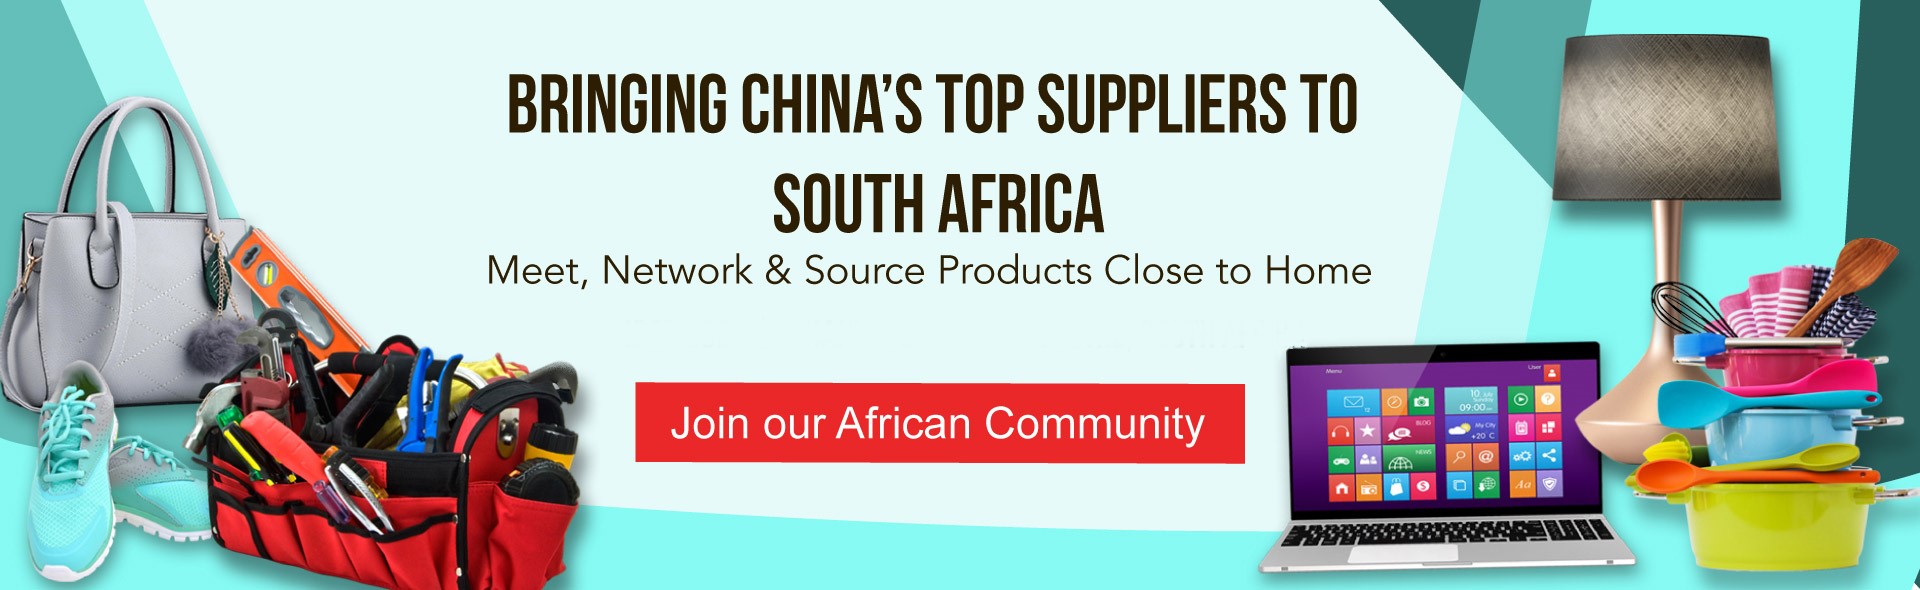 Global Sourcing Fair, South Africa